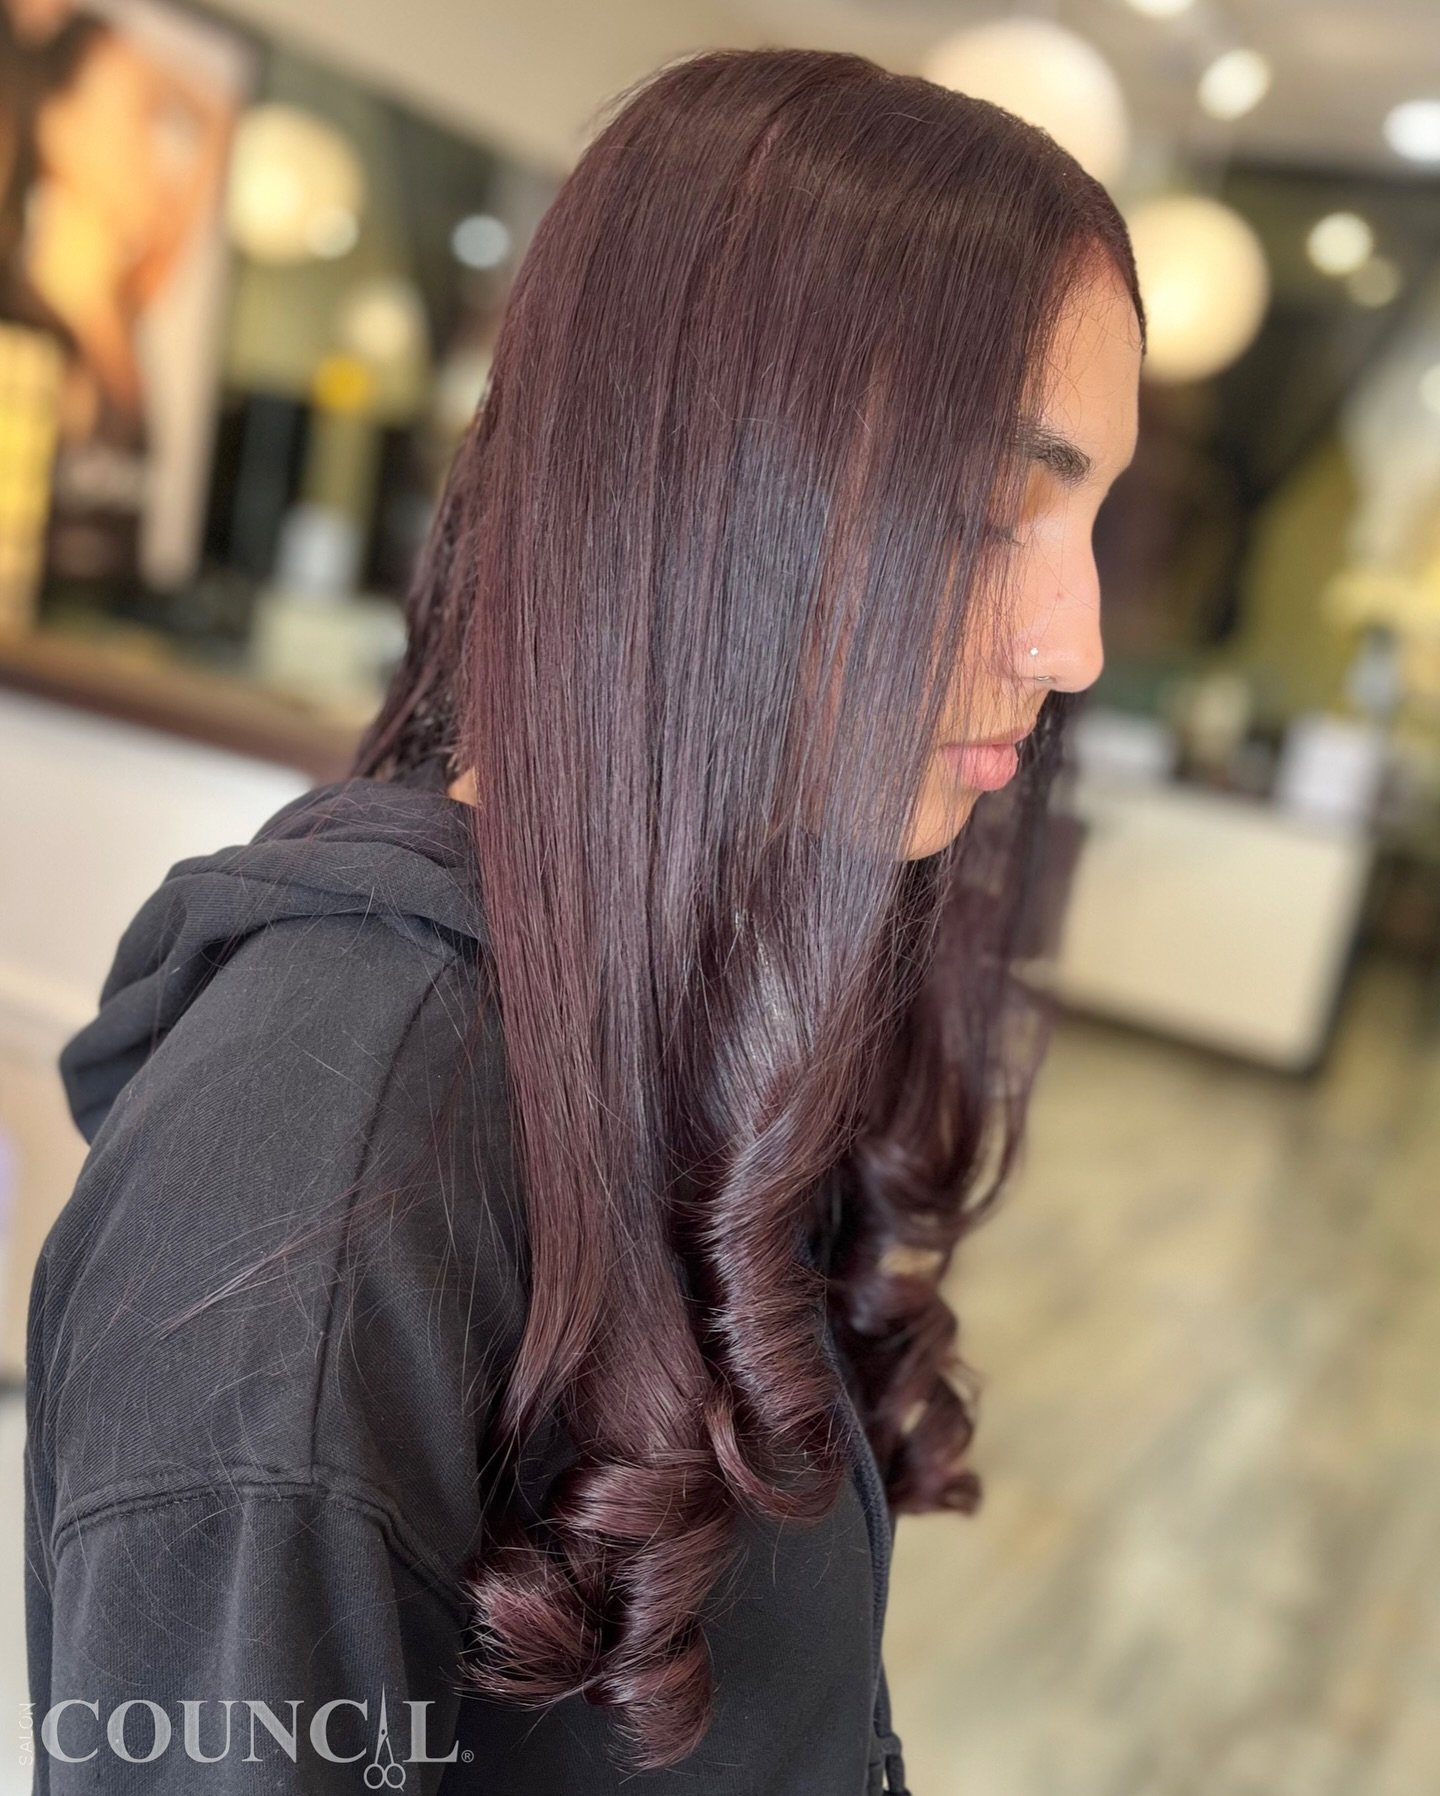 🎉#chocolateredbrownhair 
Heating up the season with a reddish chocolate brown all-over hair color! ☀️🌰
Embrace the warmth and stand out this summer. #SummerStyle #HotHairColors

ALLOVER HAIR COLOR

Hair by YARI @yarihair_styles 
@saloncouncilpines 